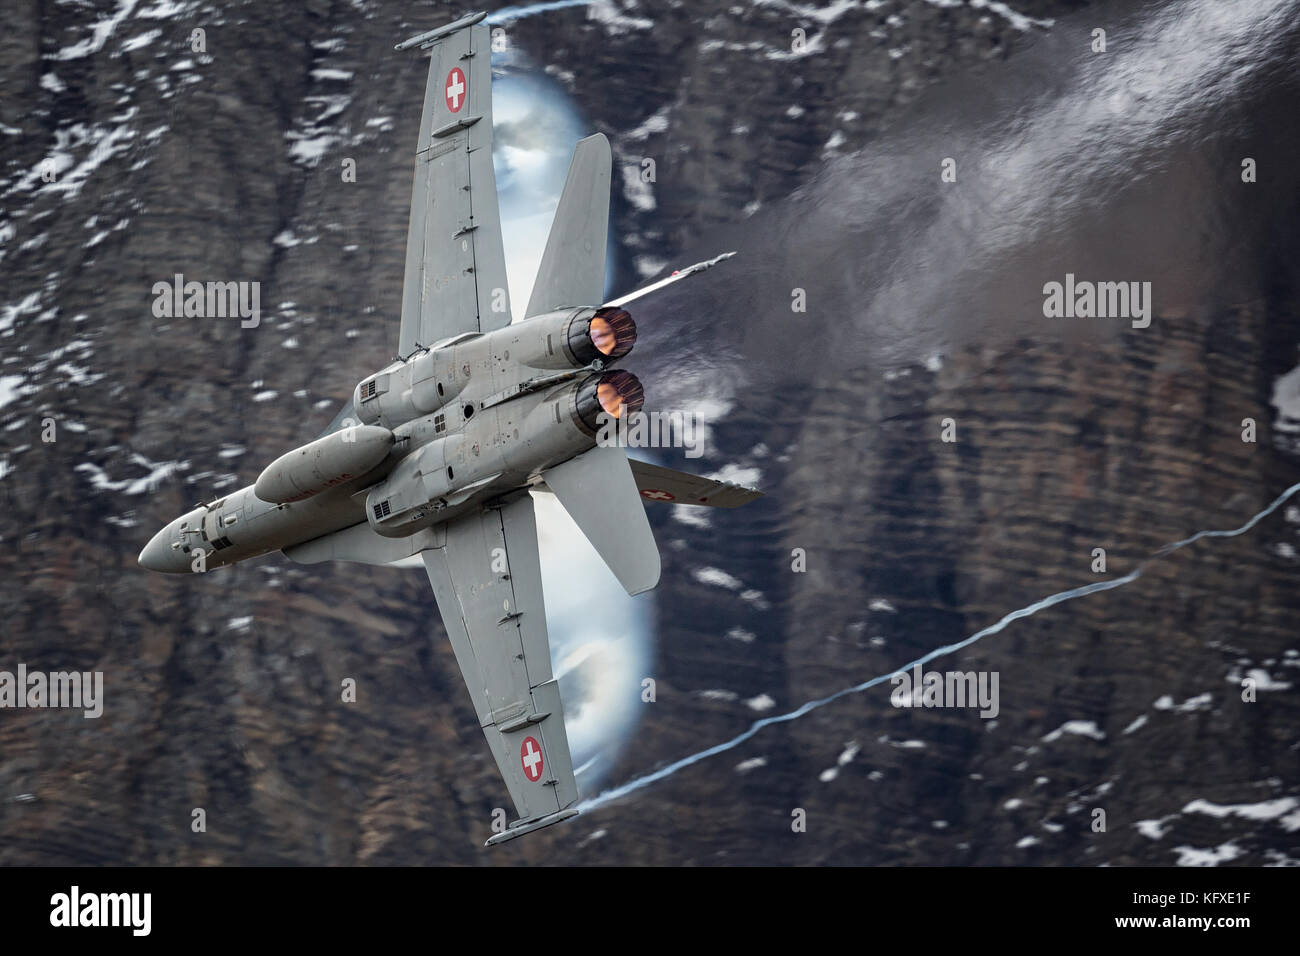 Swiss air force F-18 Hornets pushing hard in the Swiss alps Stock Photo